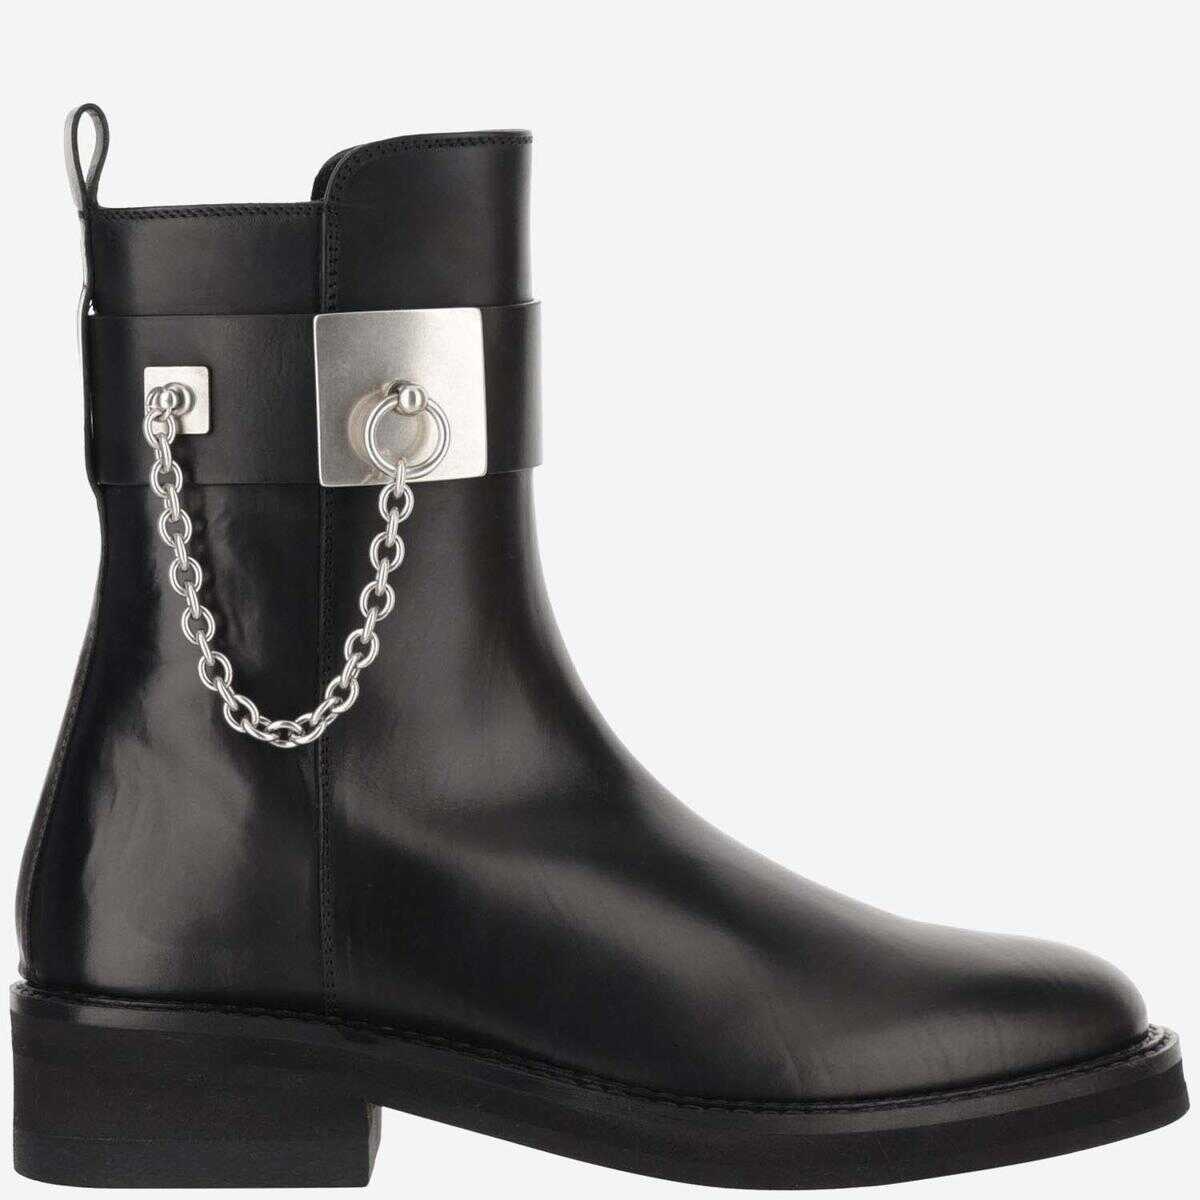 SARTORE SARTORE SMOOTH LEATHER ANKLE BOOT WITH CHAIN Nero